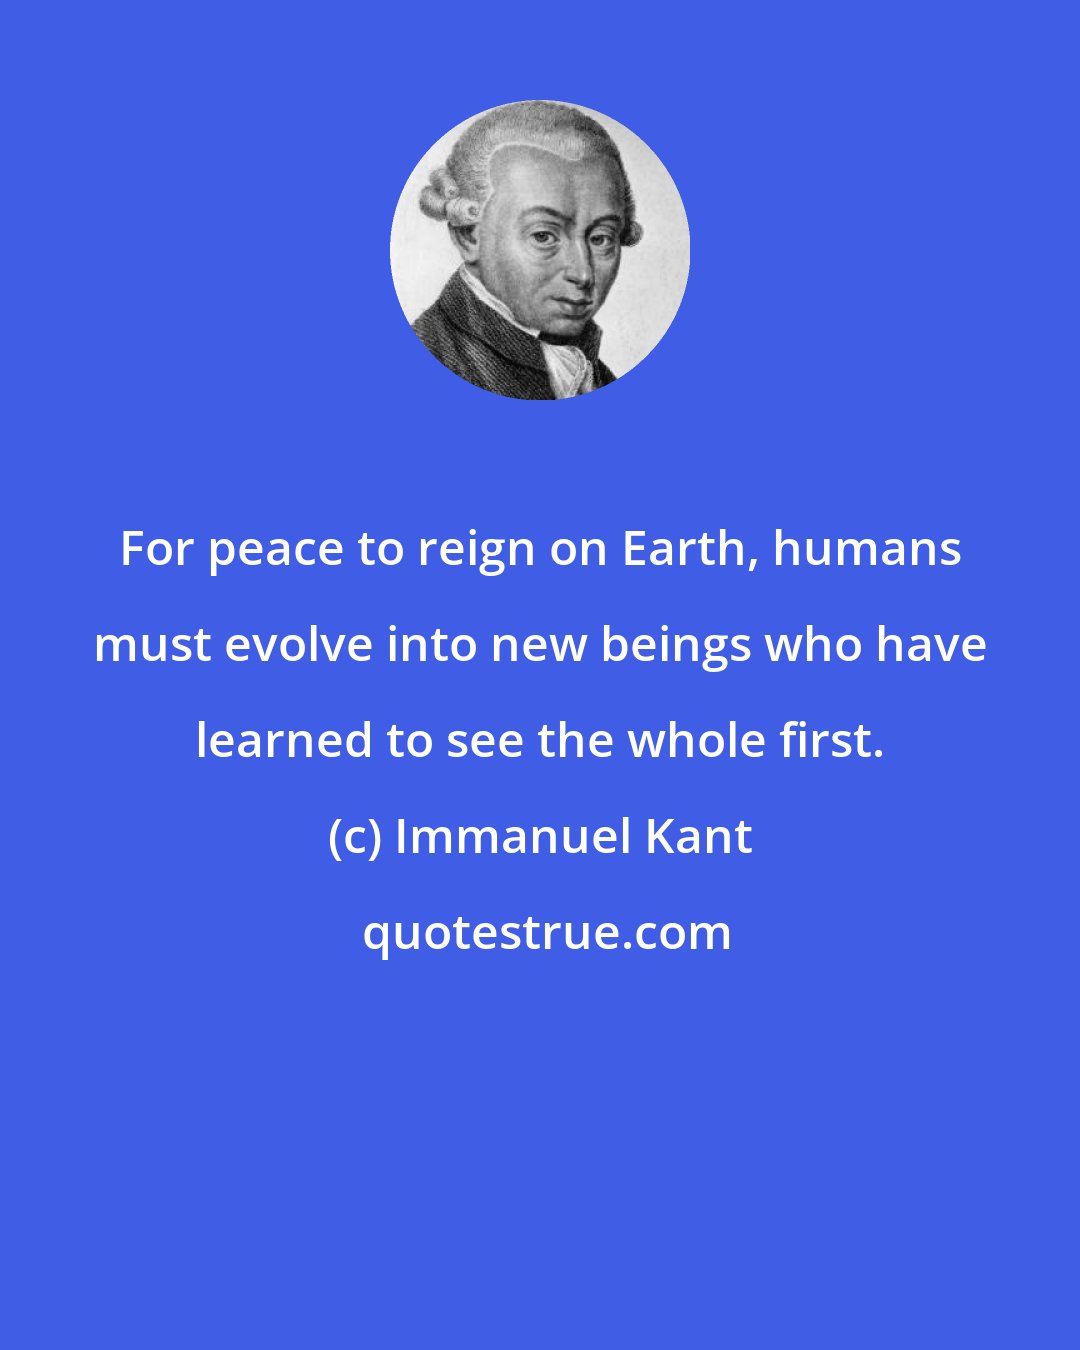 Immanuel Kant: For peace to reign on Earth, humans must evolve into new beings who have learned to see the whole first.